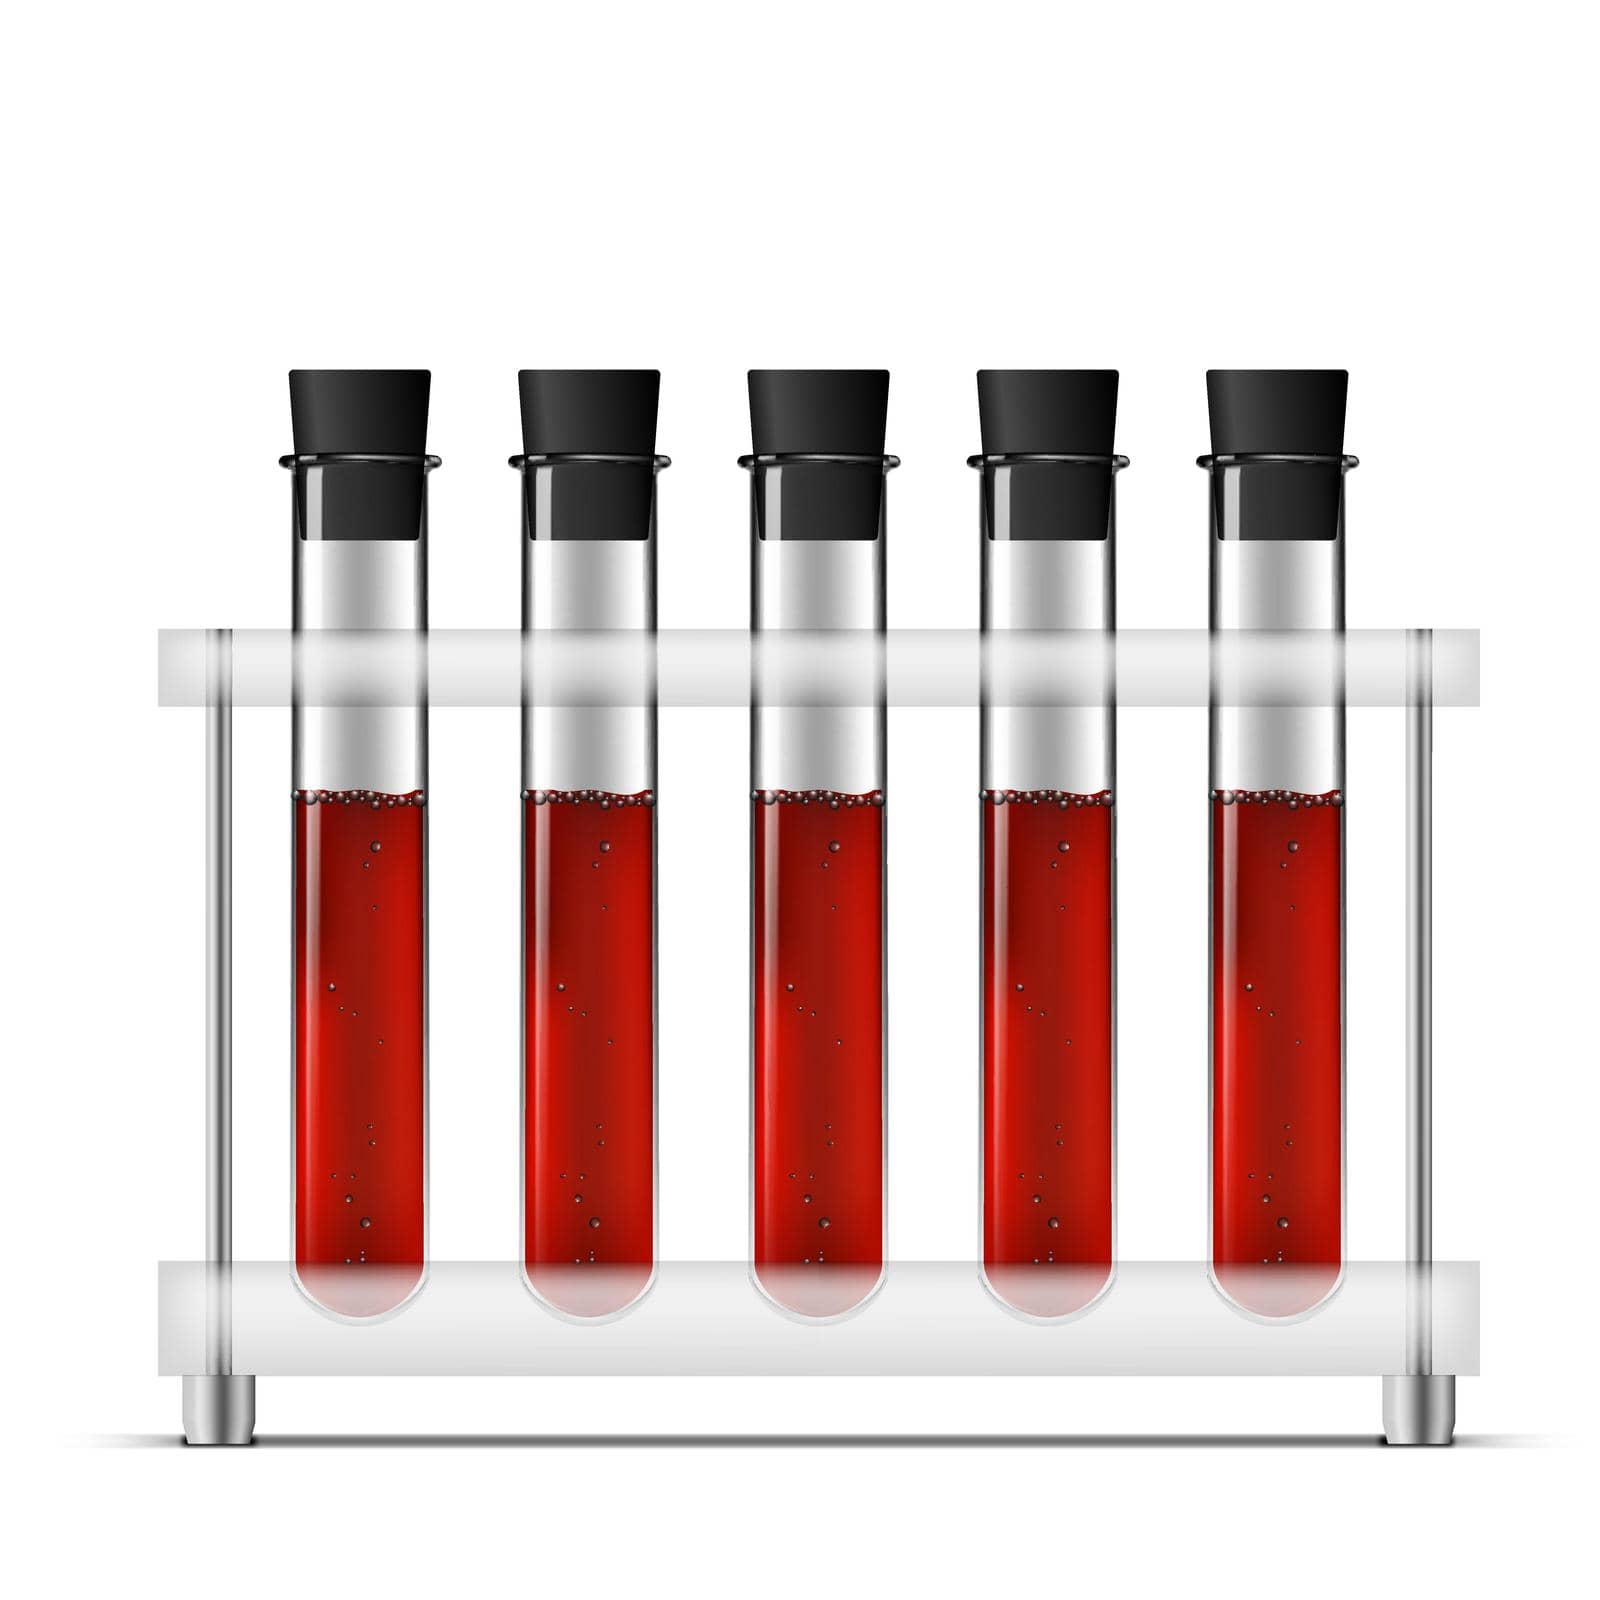 Test Tubes Filled With Blood by VectorThings